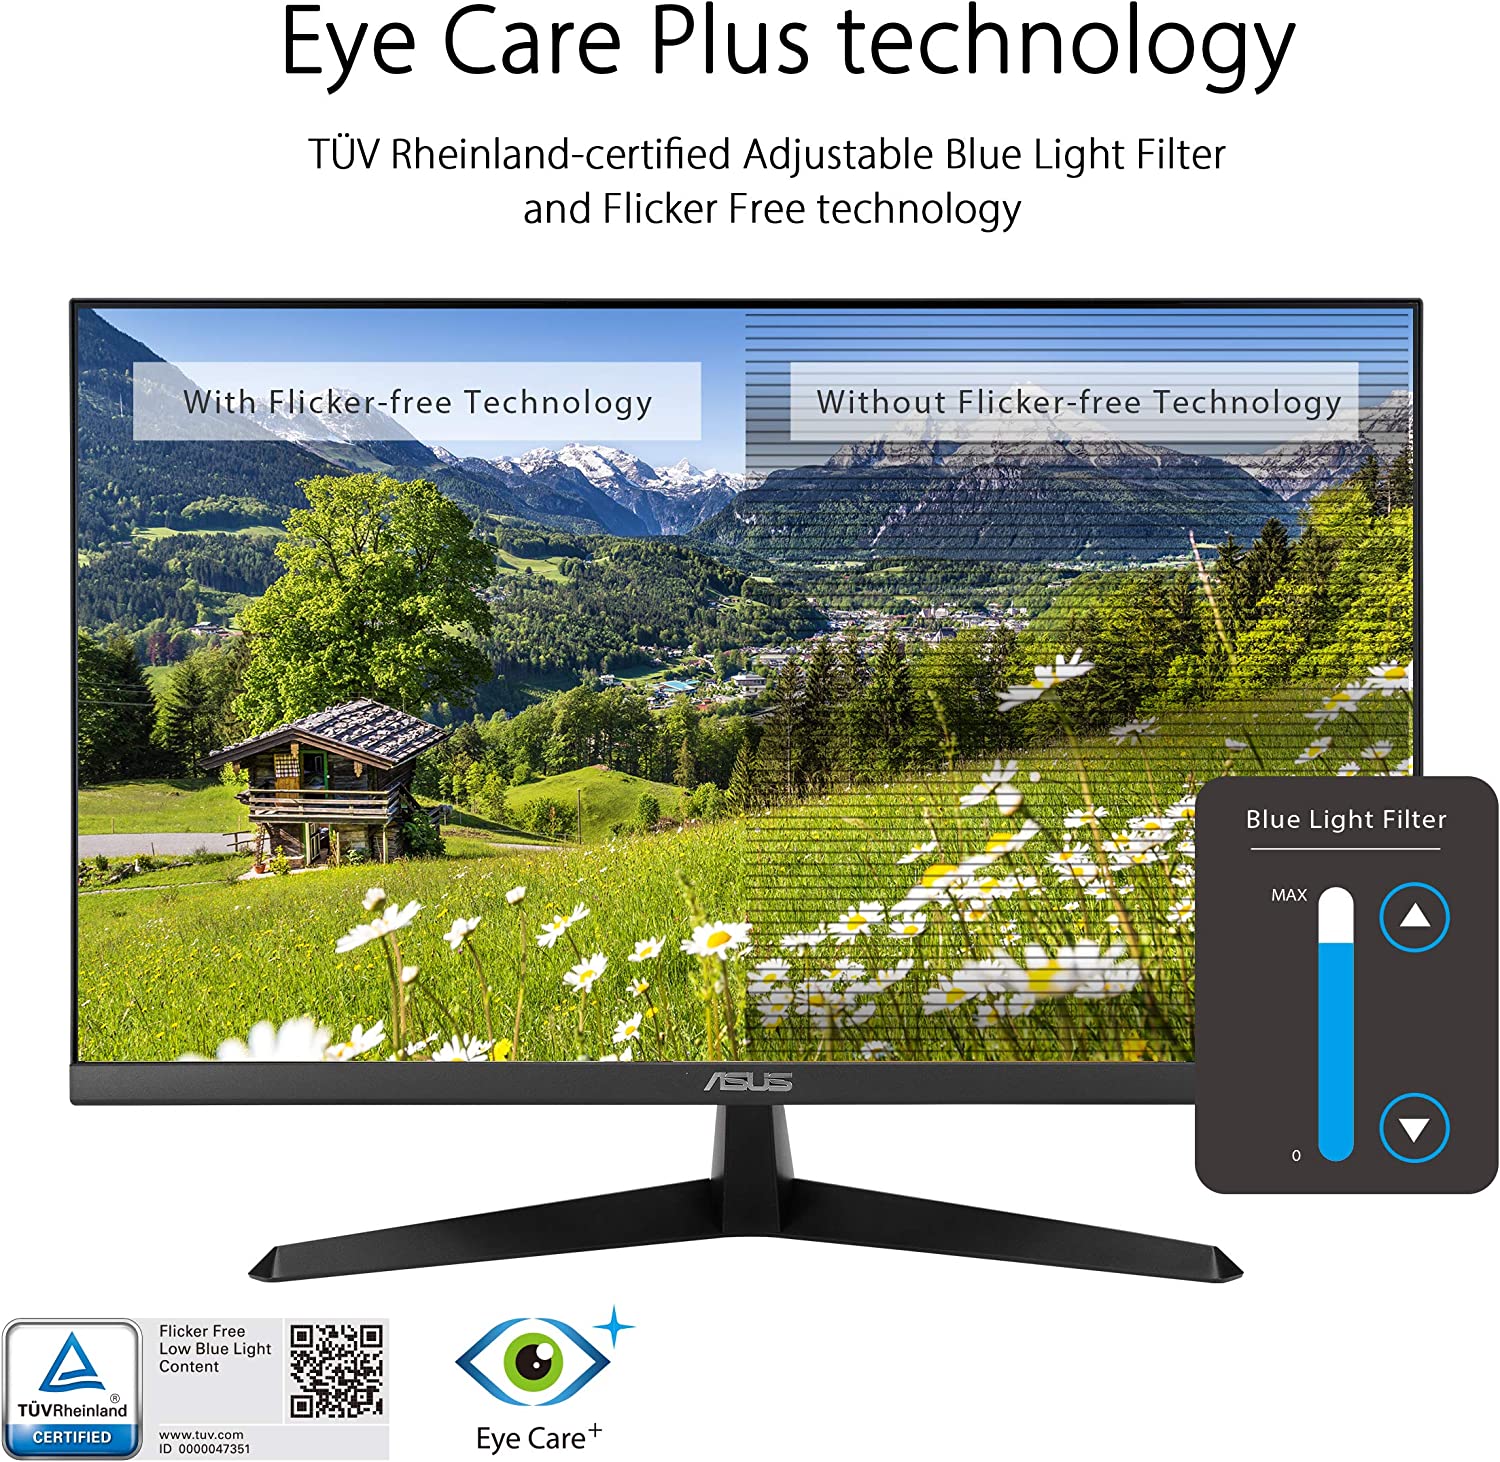 Asus 27-inch Monitor VY279 Eye Care 1920 x 1080p 75Hz 1ms IPS Panel FreeSync Bluelight Filter